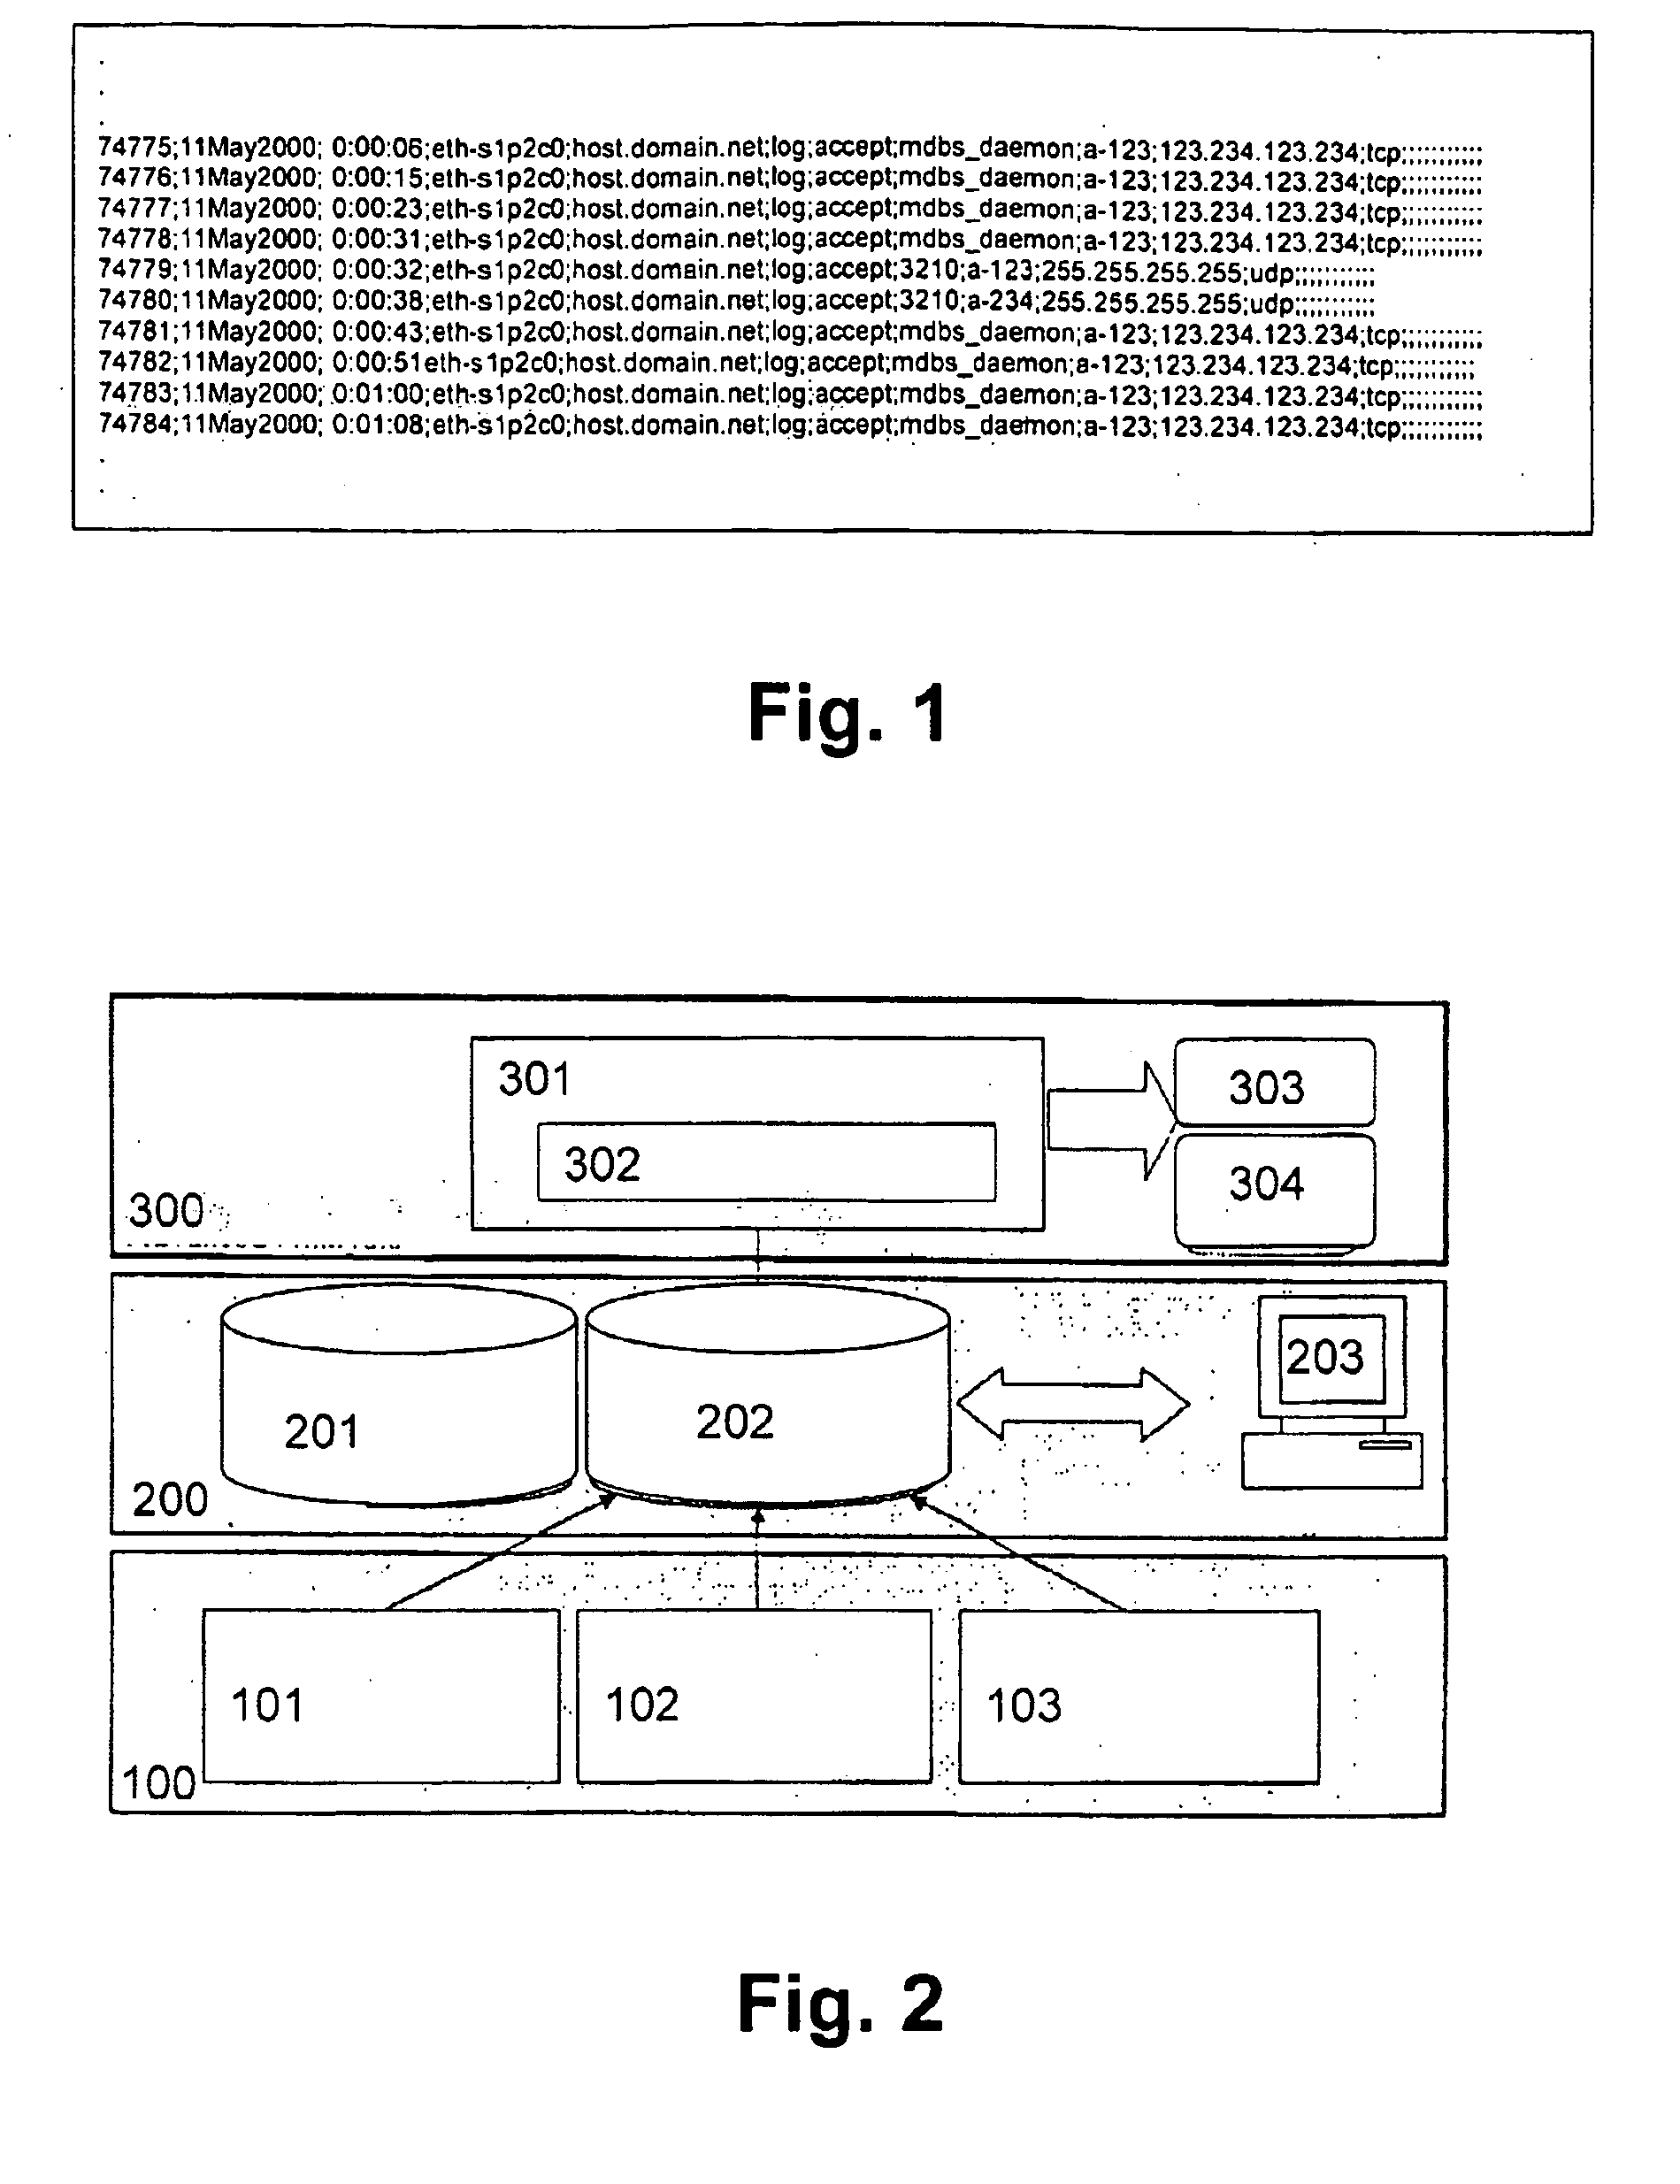 Method and apparatus for compressing log record information